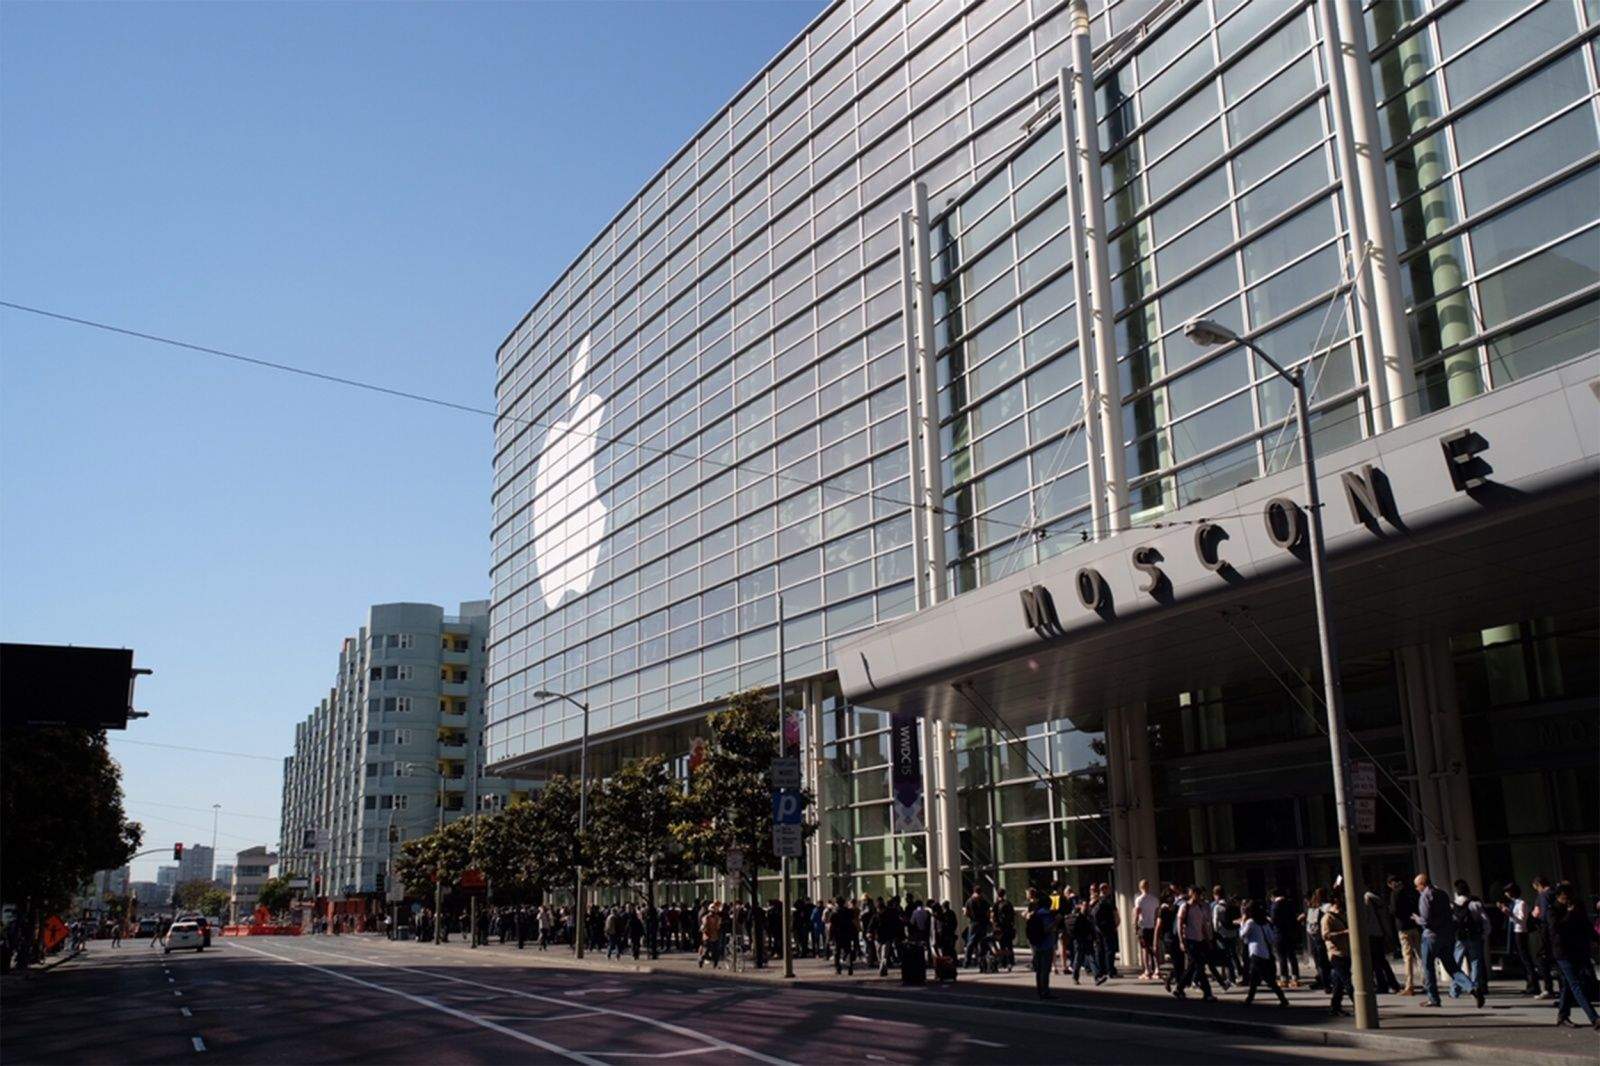 Will Apple hold WWDC on June 13 - 17 this year at the Moscone Center?